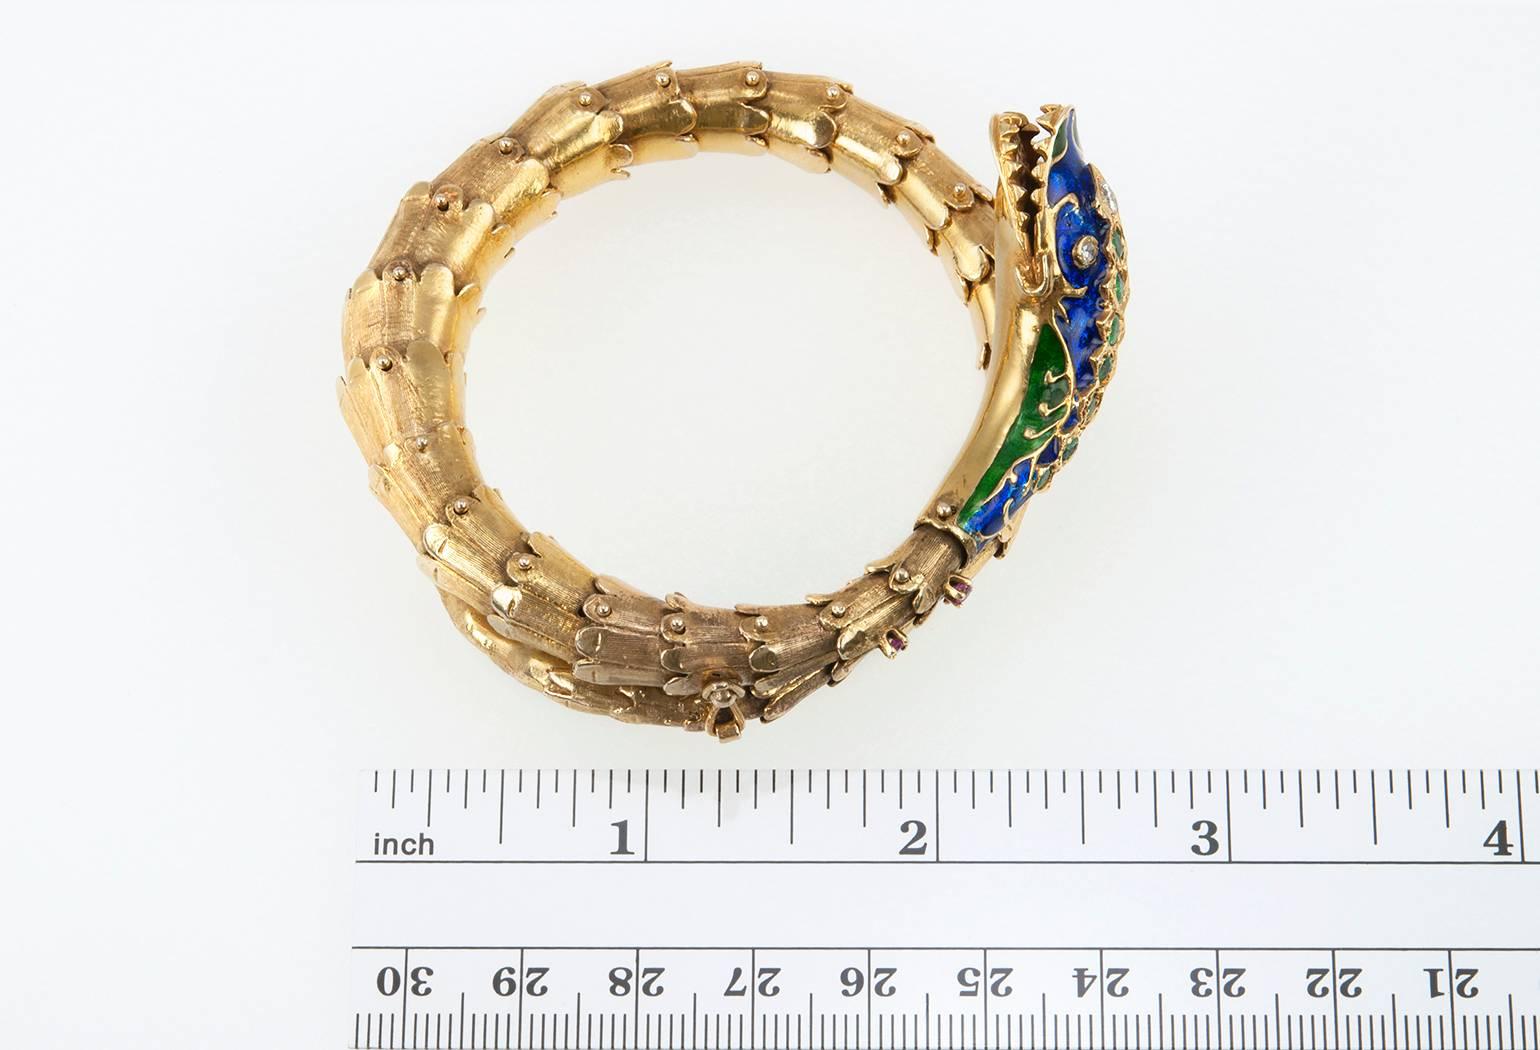 
A 1950s snake bracelet constructed in 18 karat yellow gold with blue and green enamel.  The snake's head has 3 diamonds, approximately 0.30 carats in total diamond weight, along with 7 emeralds down it's head and 2 rubies. Fantastic workmanship